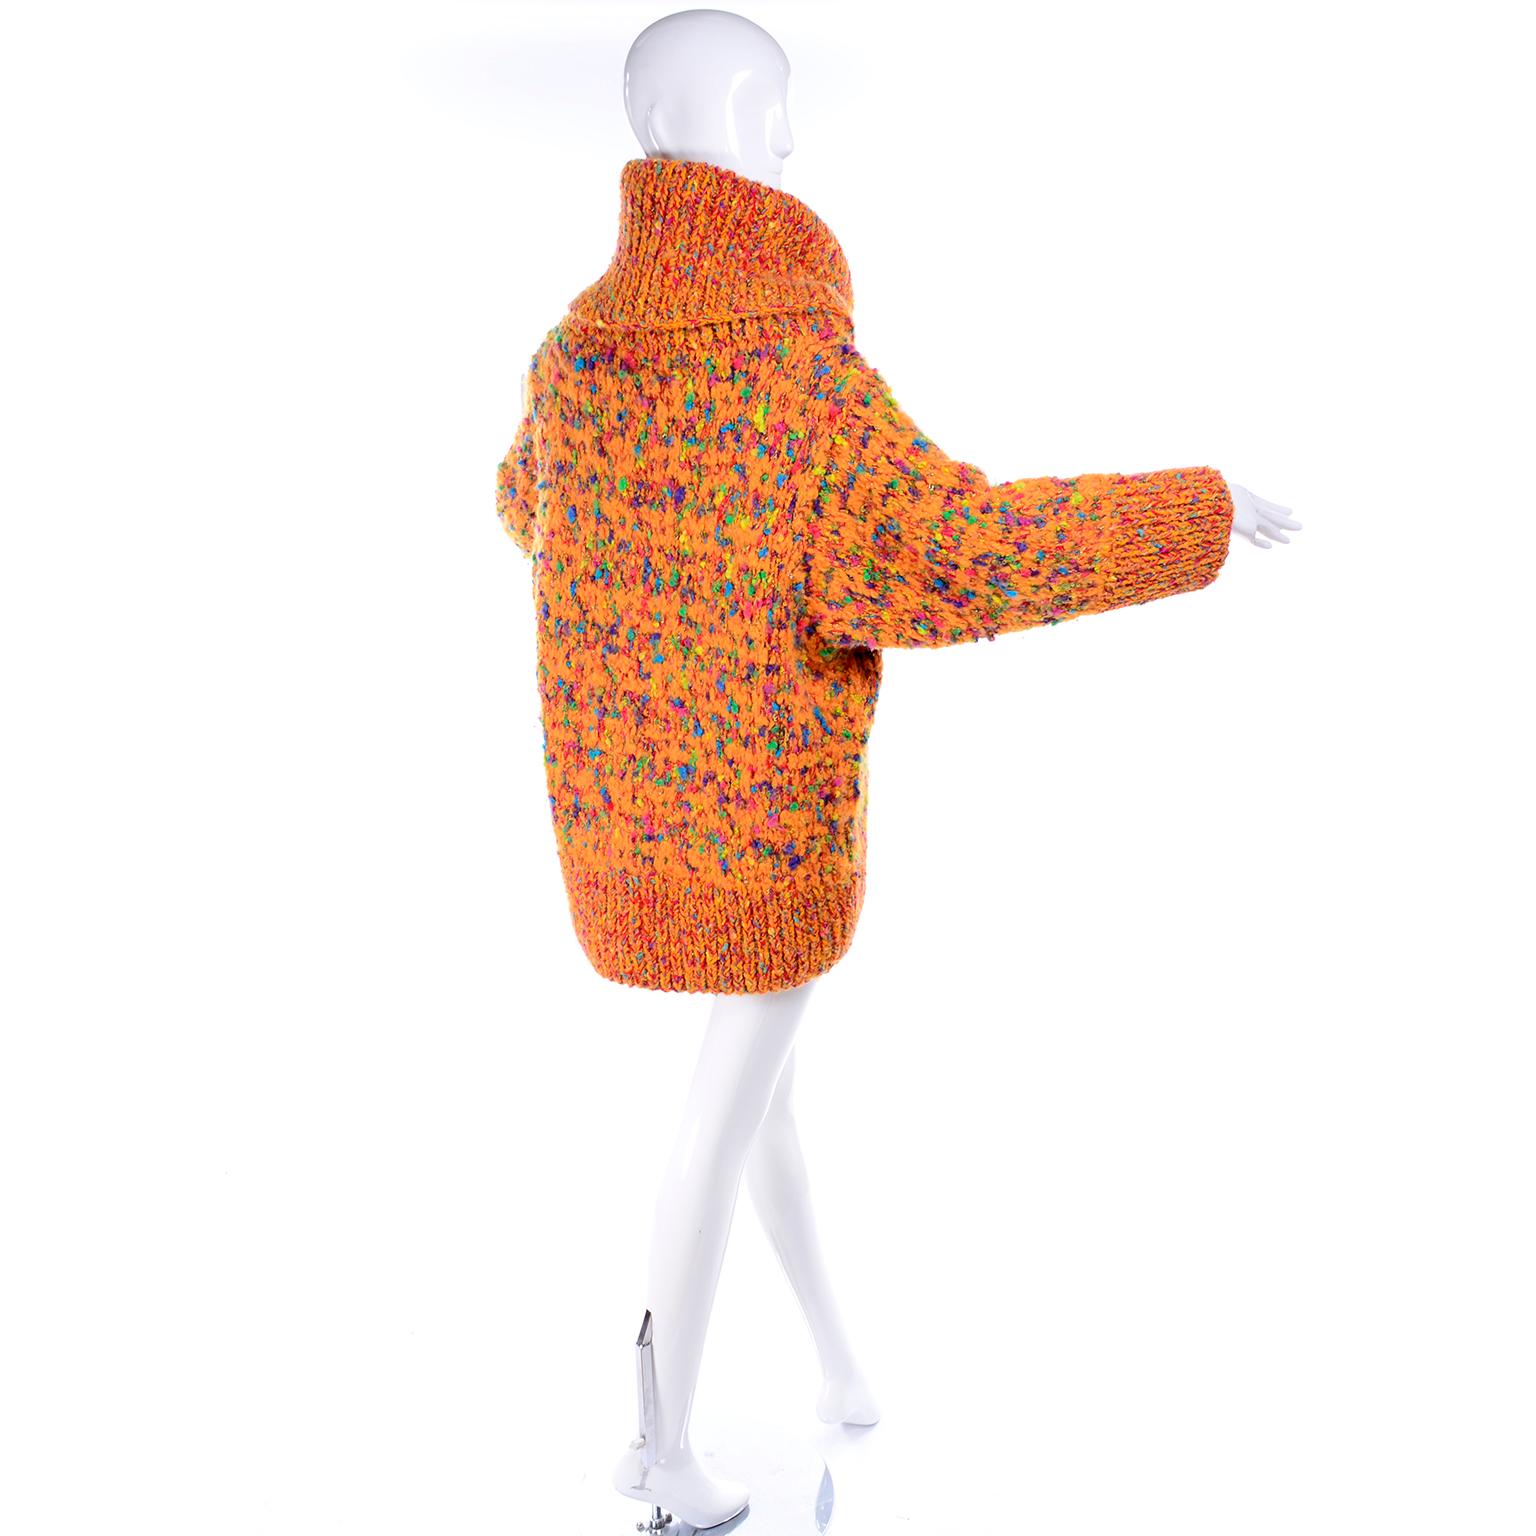 Orange 1980s Dramatic Oversized Vintage Sweater in Colorful Mohair Blend by Anne Klein